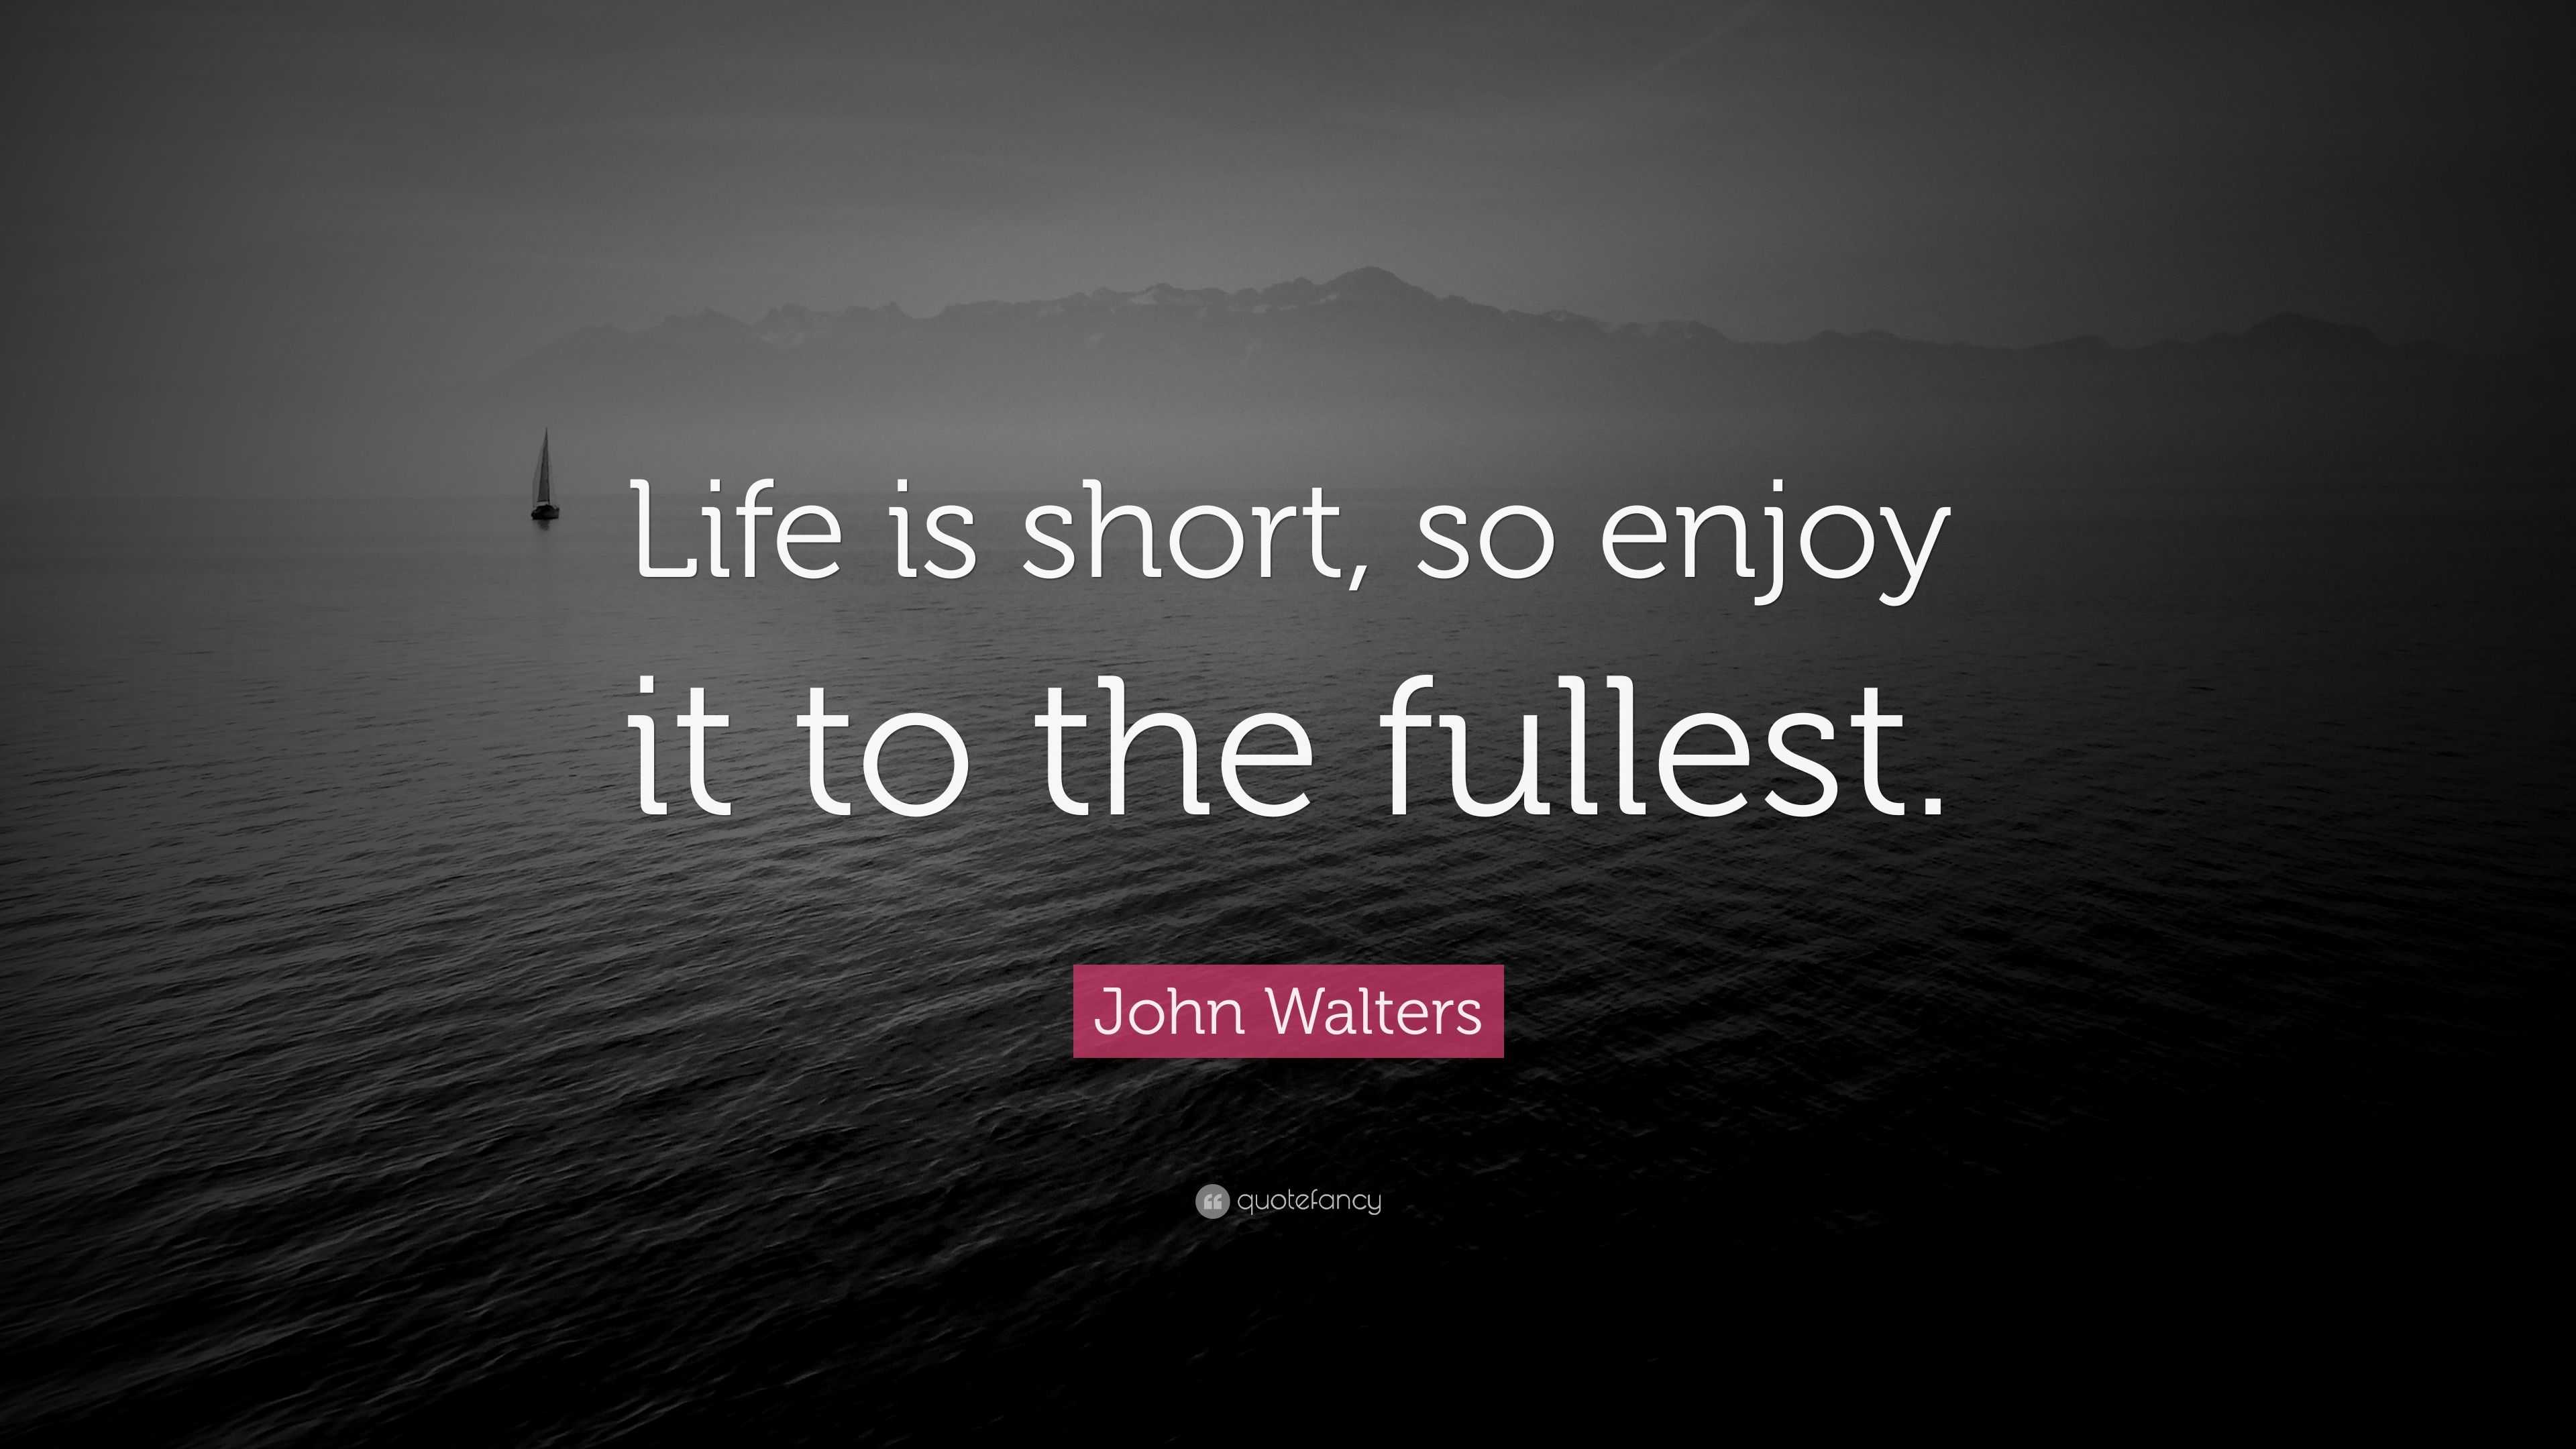 John Walters Quote “Life is short so enjoy it to the fullest